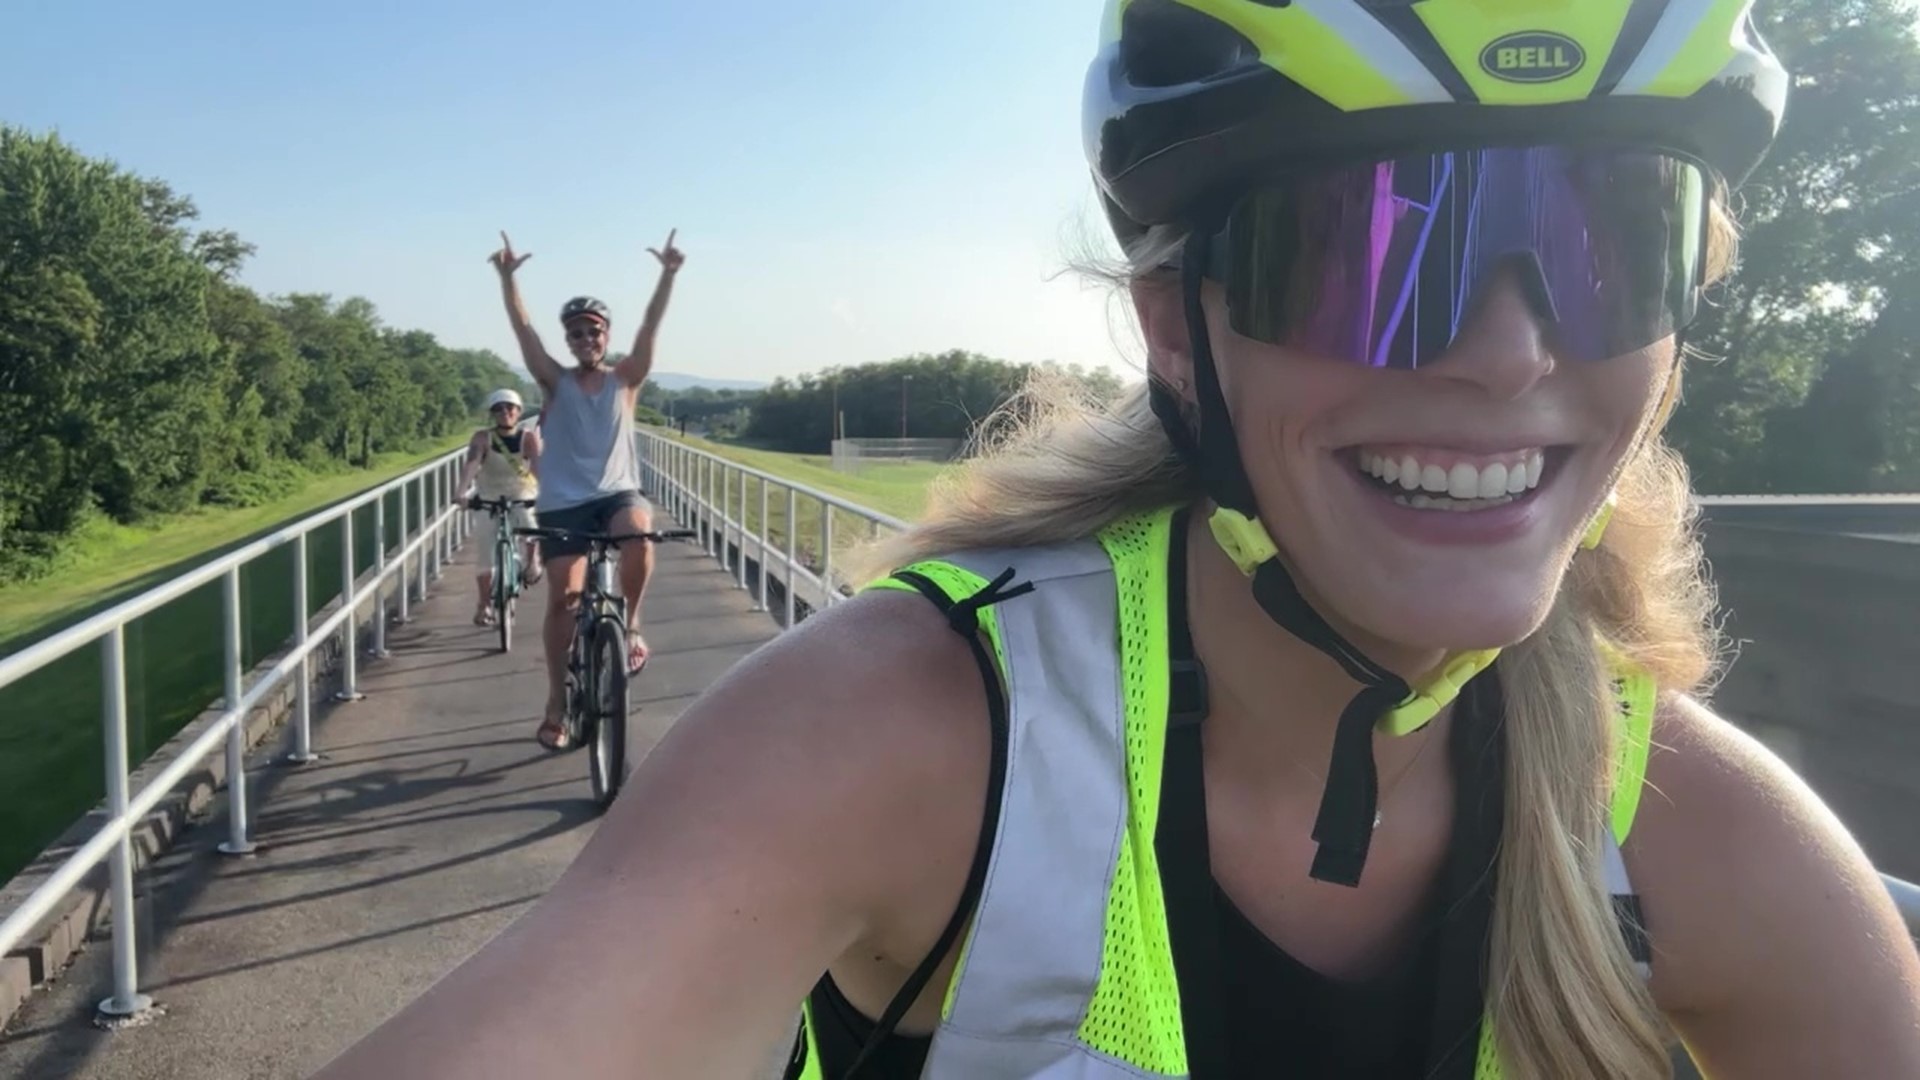 Newswatch 16's Chelsea Strub joined the gang for a ride through Luzerne County.